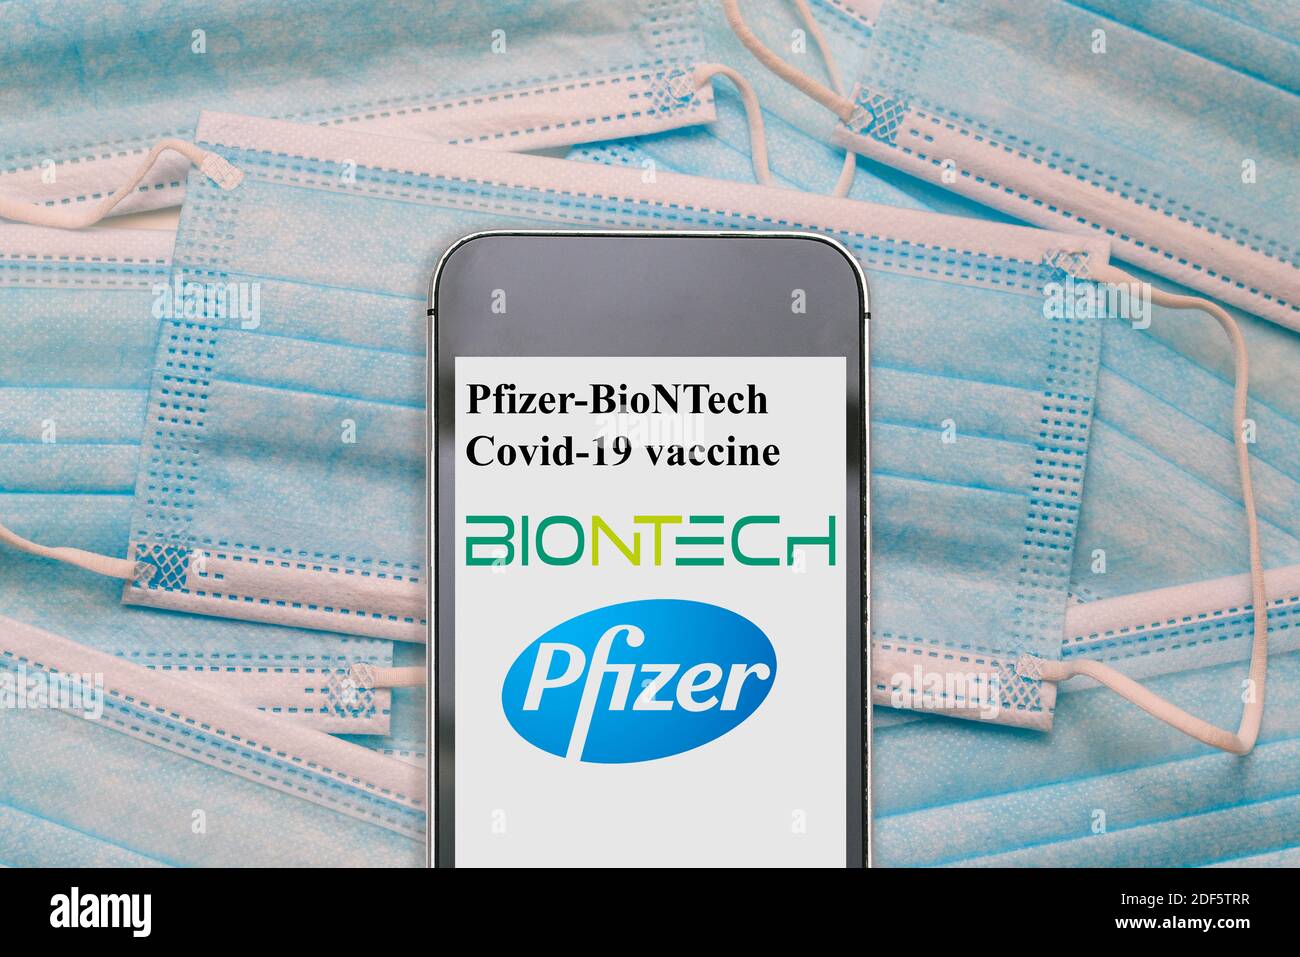 Pfizer biontech covid 19 vaccine. Reino unido vacina. UK approved pfizer vaccine. News on a smartphone. Blue disposable medical masks: NEW YORK, USA, Stock Photo